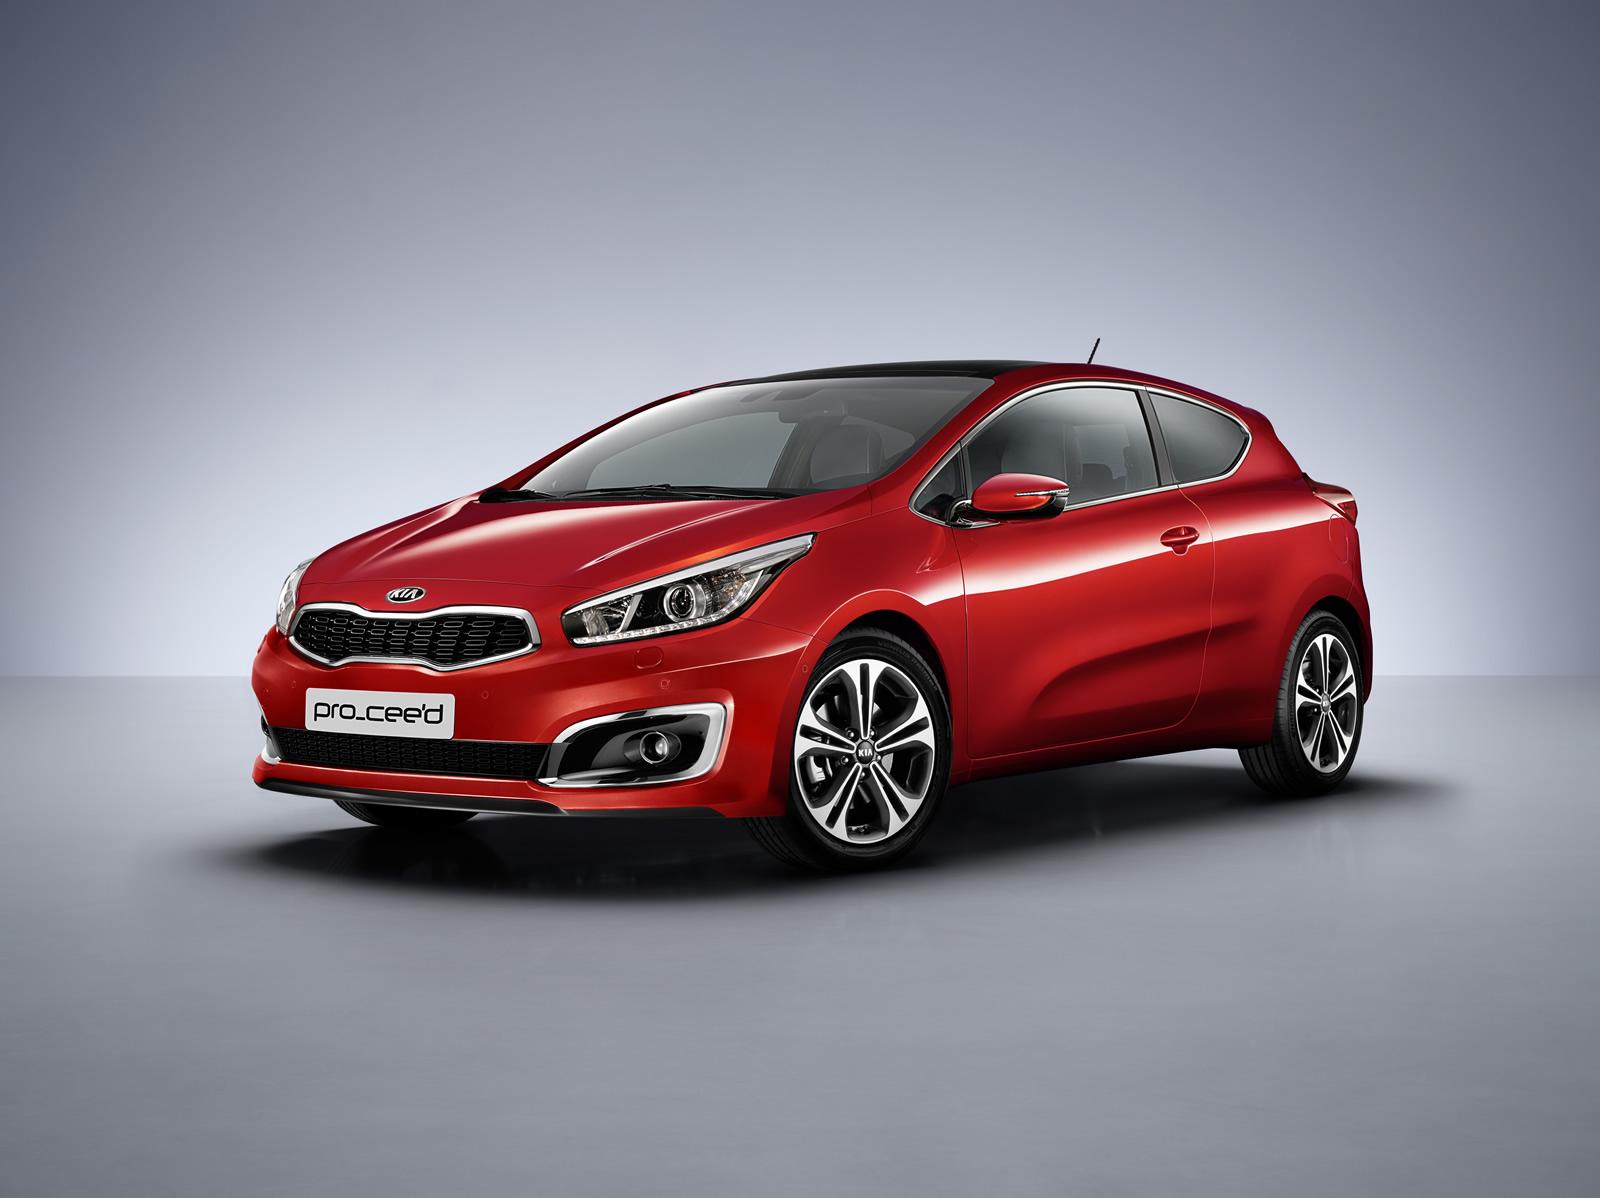 2015 Kia Cee’d Facelift Gets 1.0 ecoTurbo Engine and 7